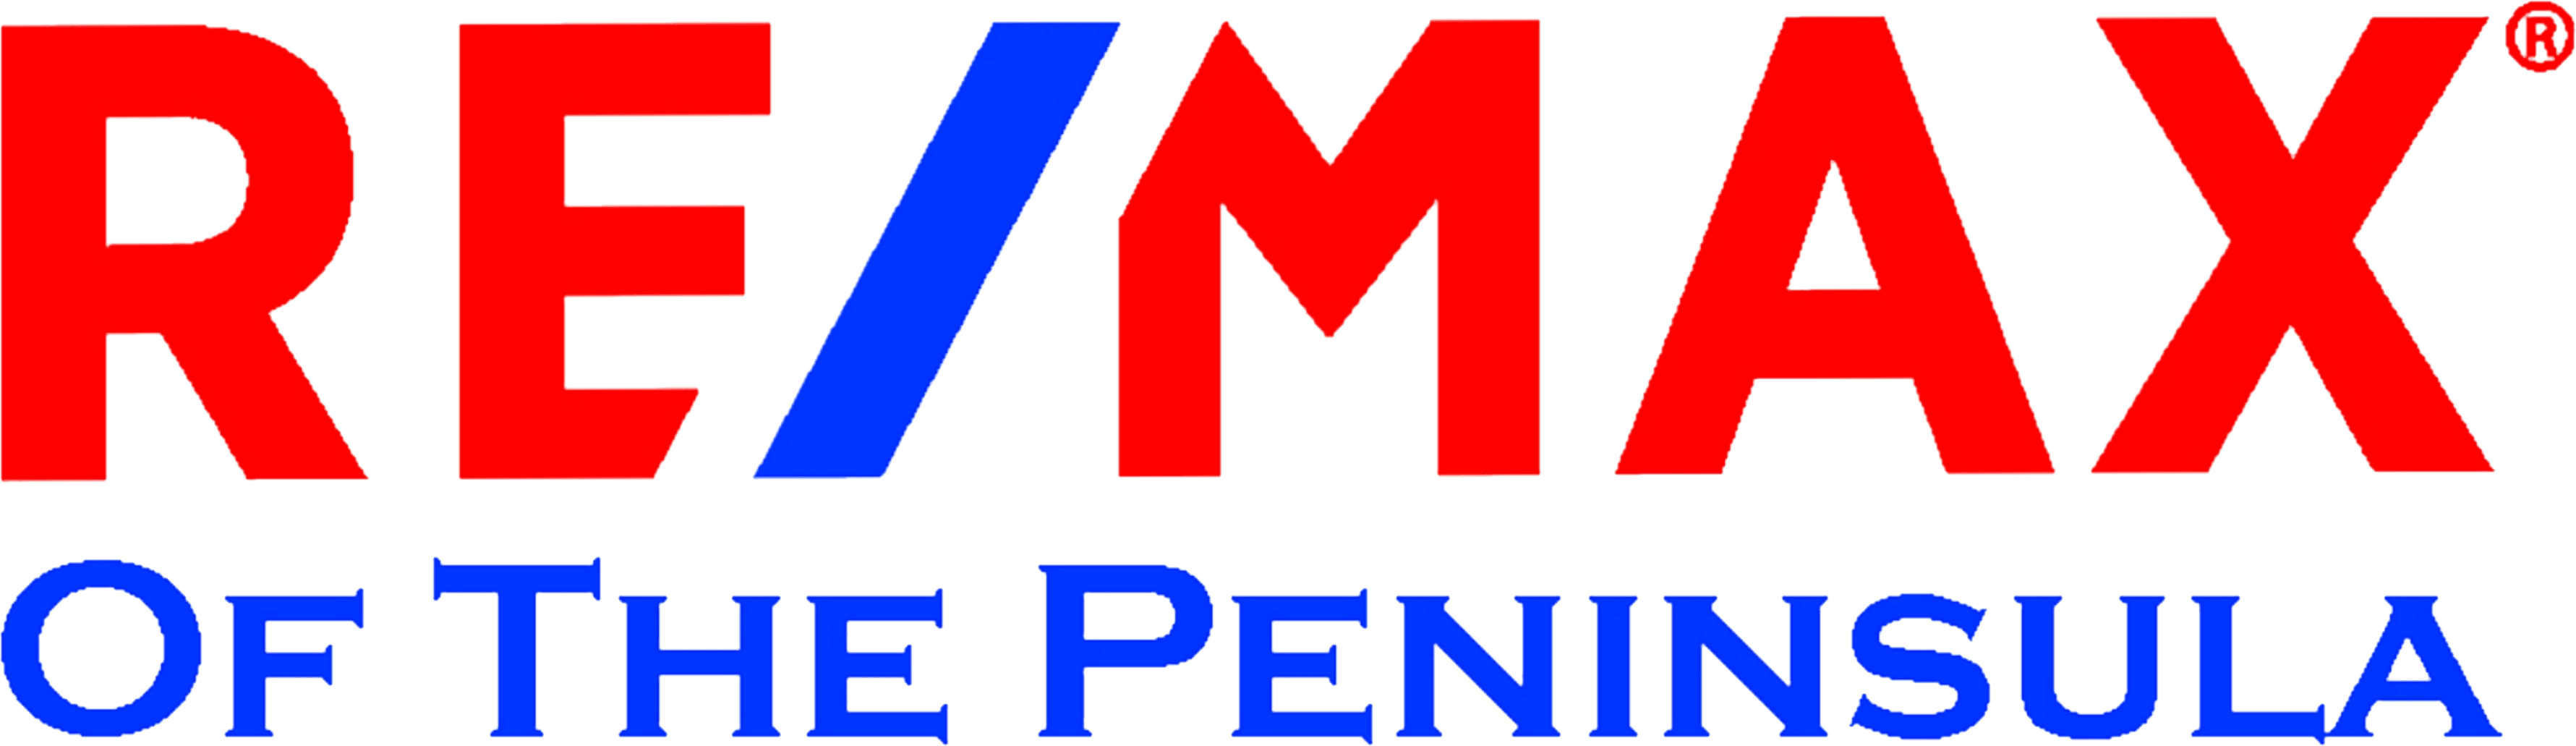 Re/Max of the Peninsula